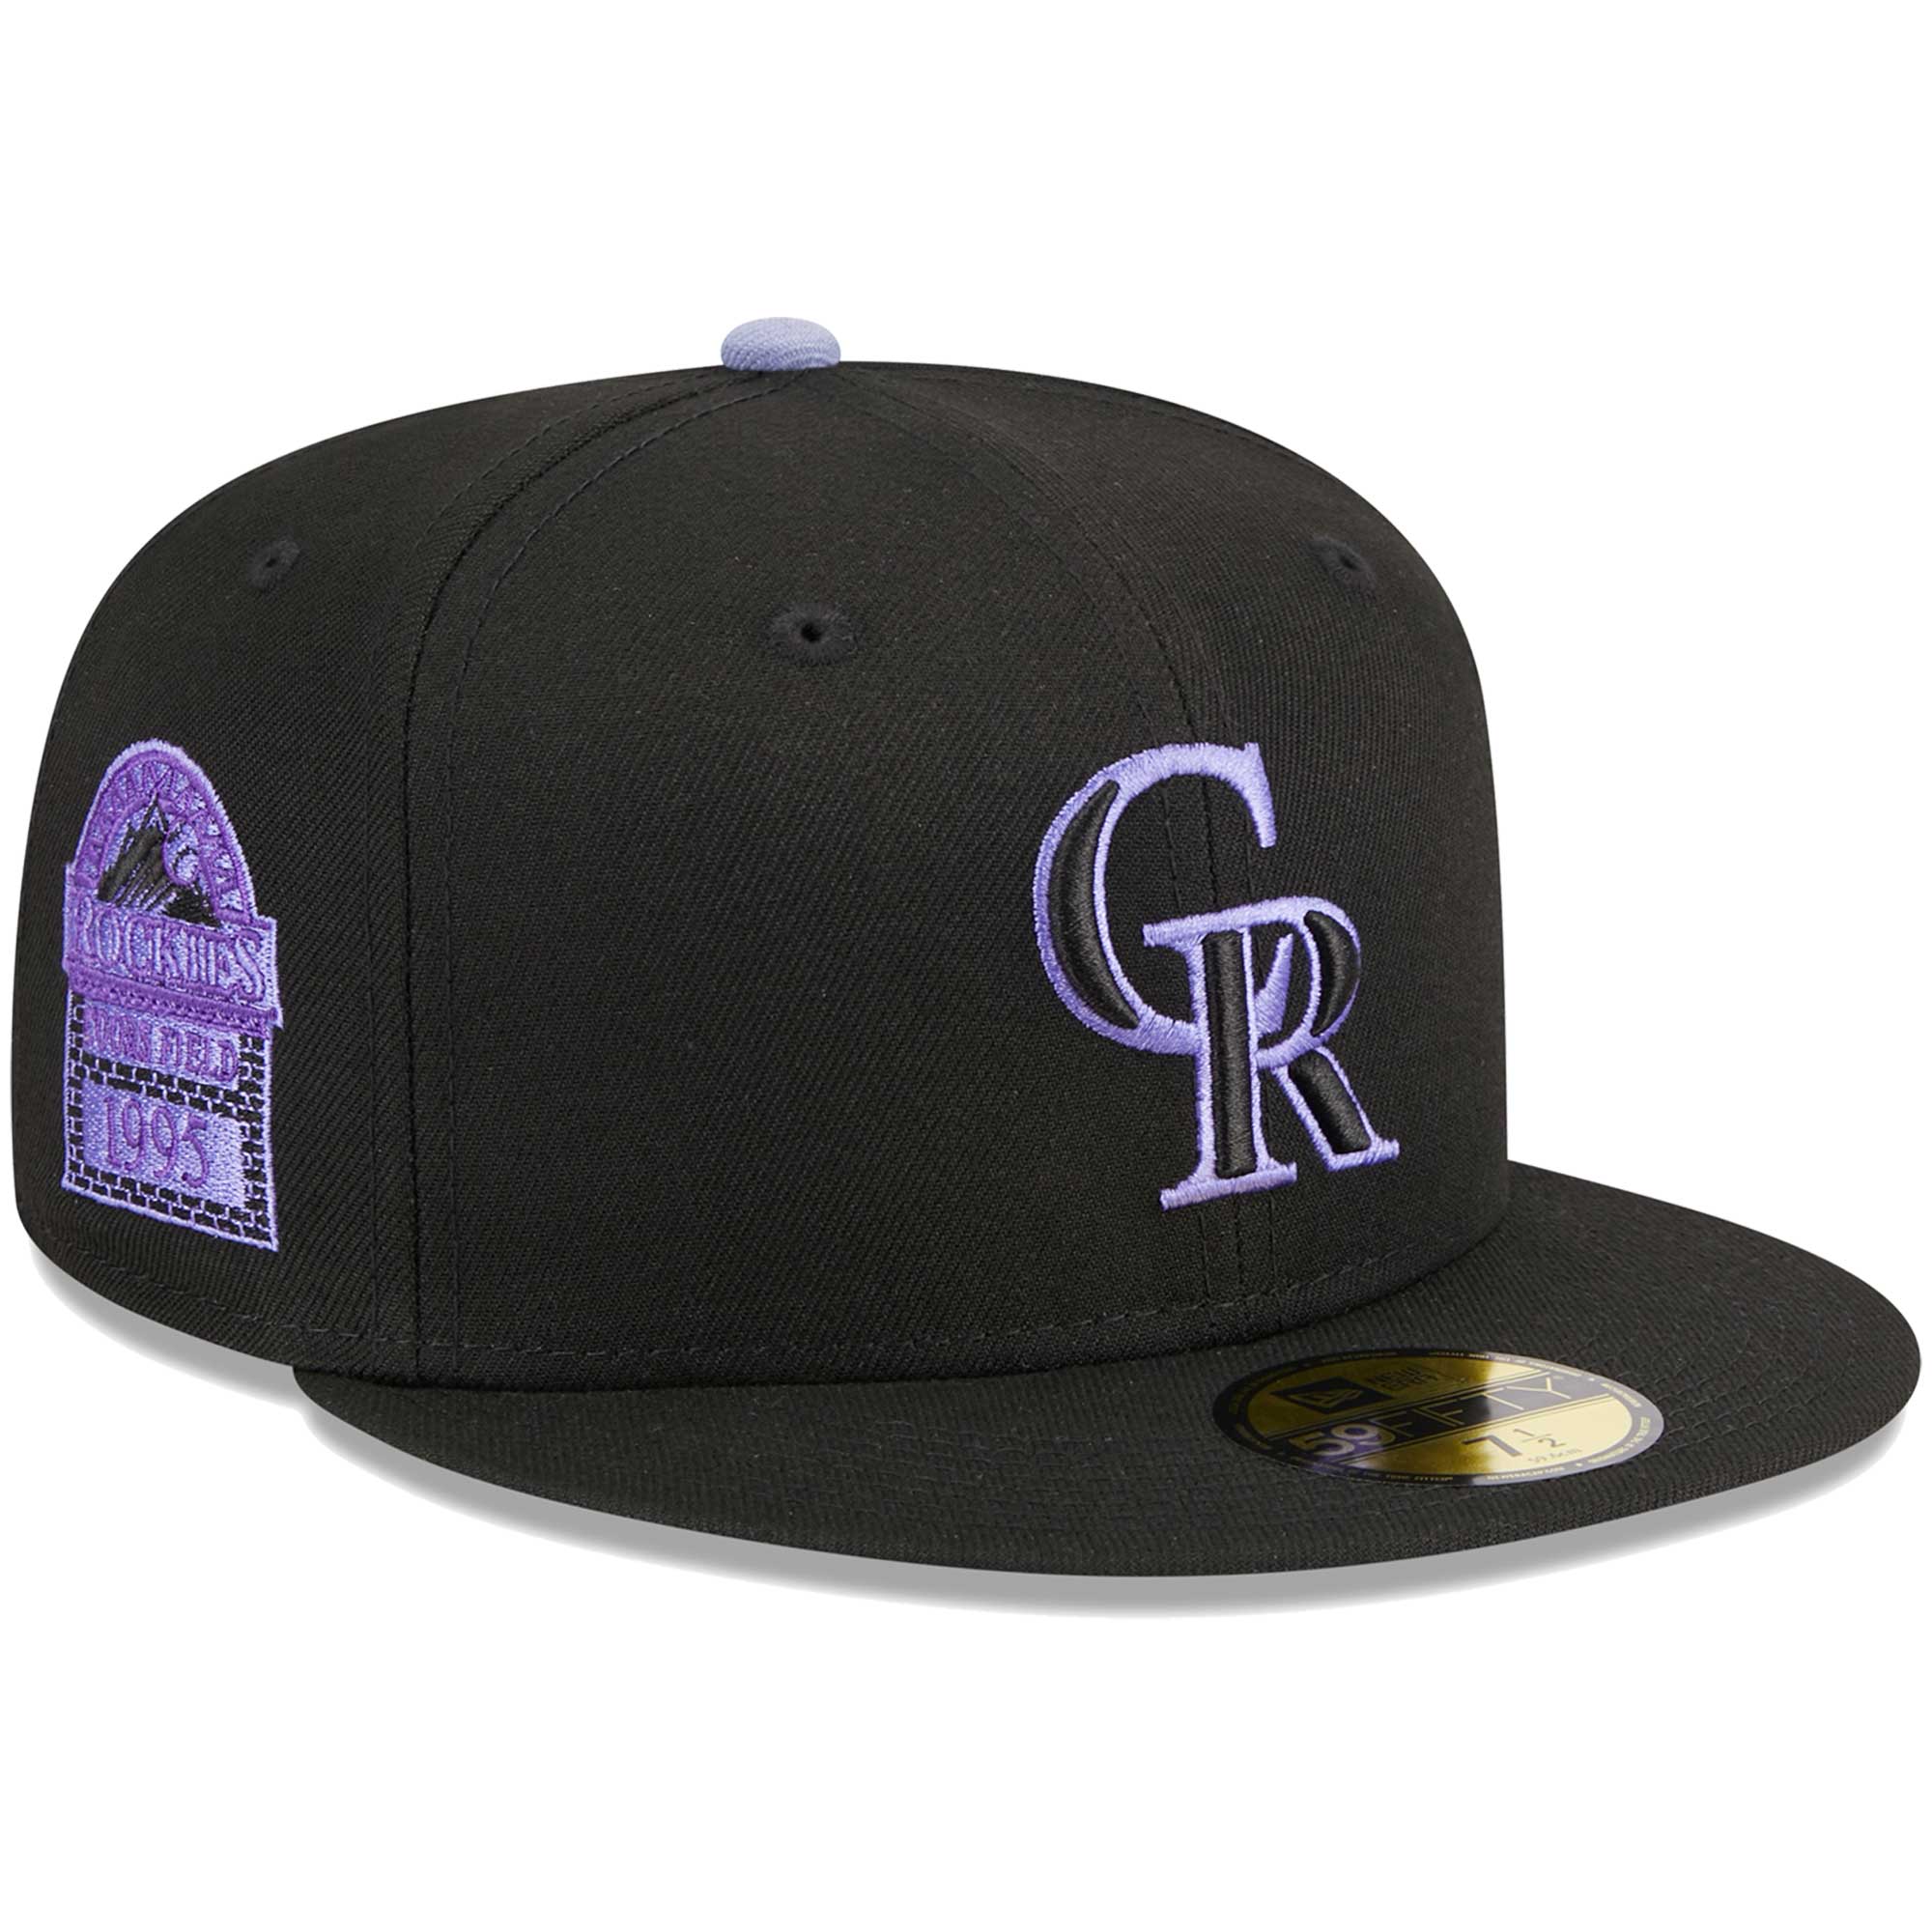 New Era Men's Colorado Rockies Low Profile 59FIFTY Fitted Hat - 7 3/8 Each